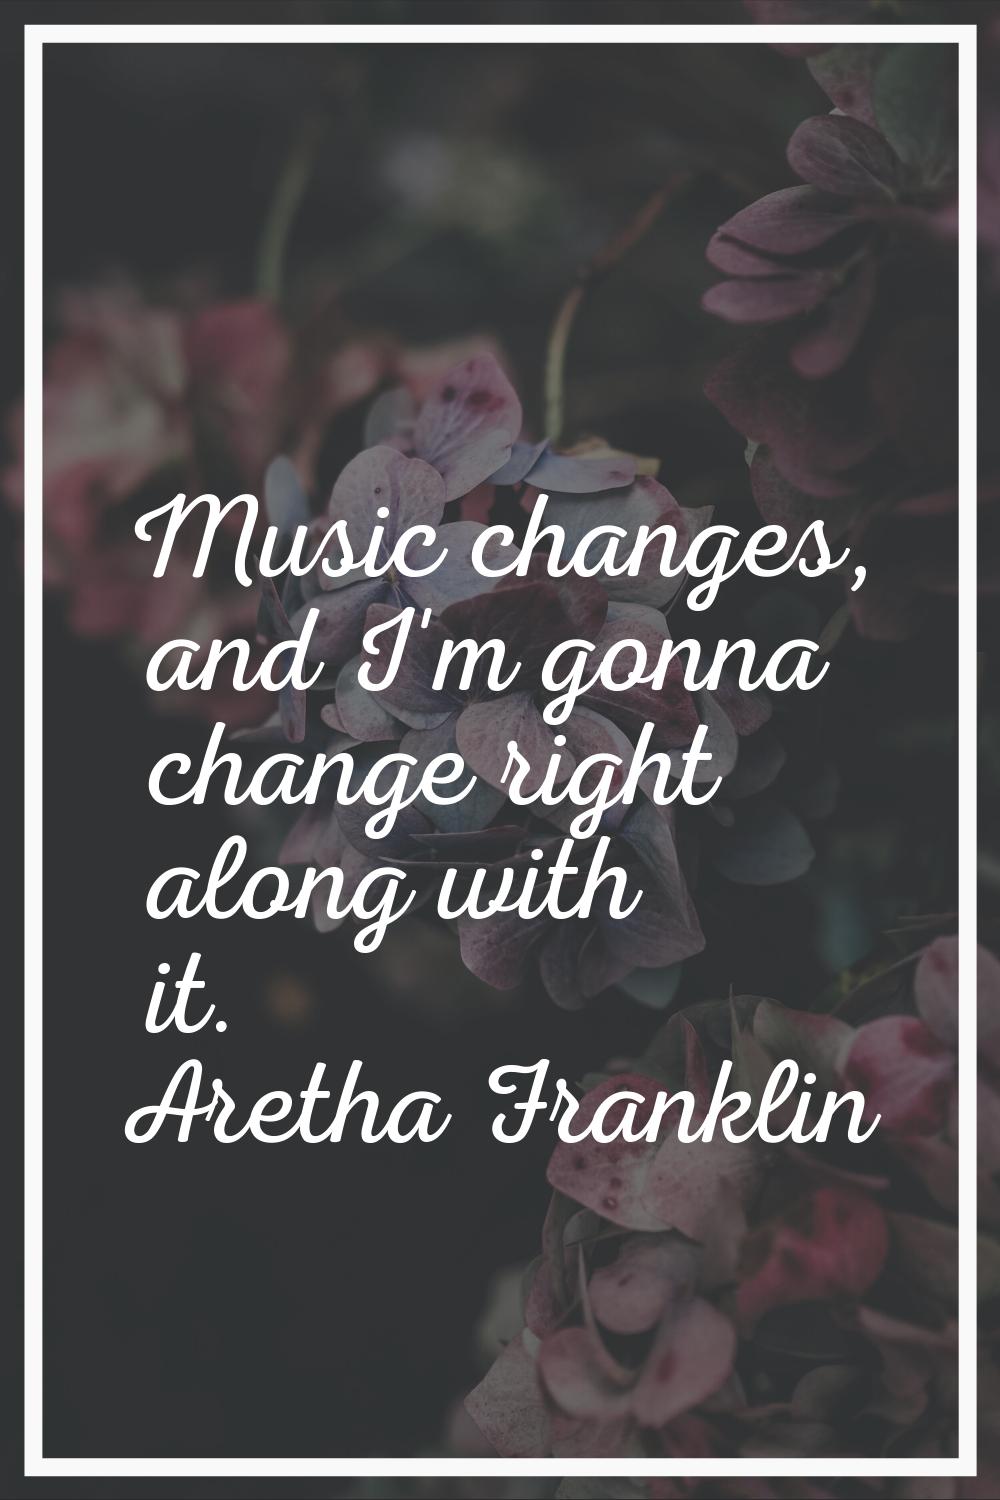 Music changes, and I'm gonna change right along with it.